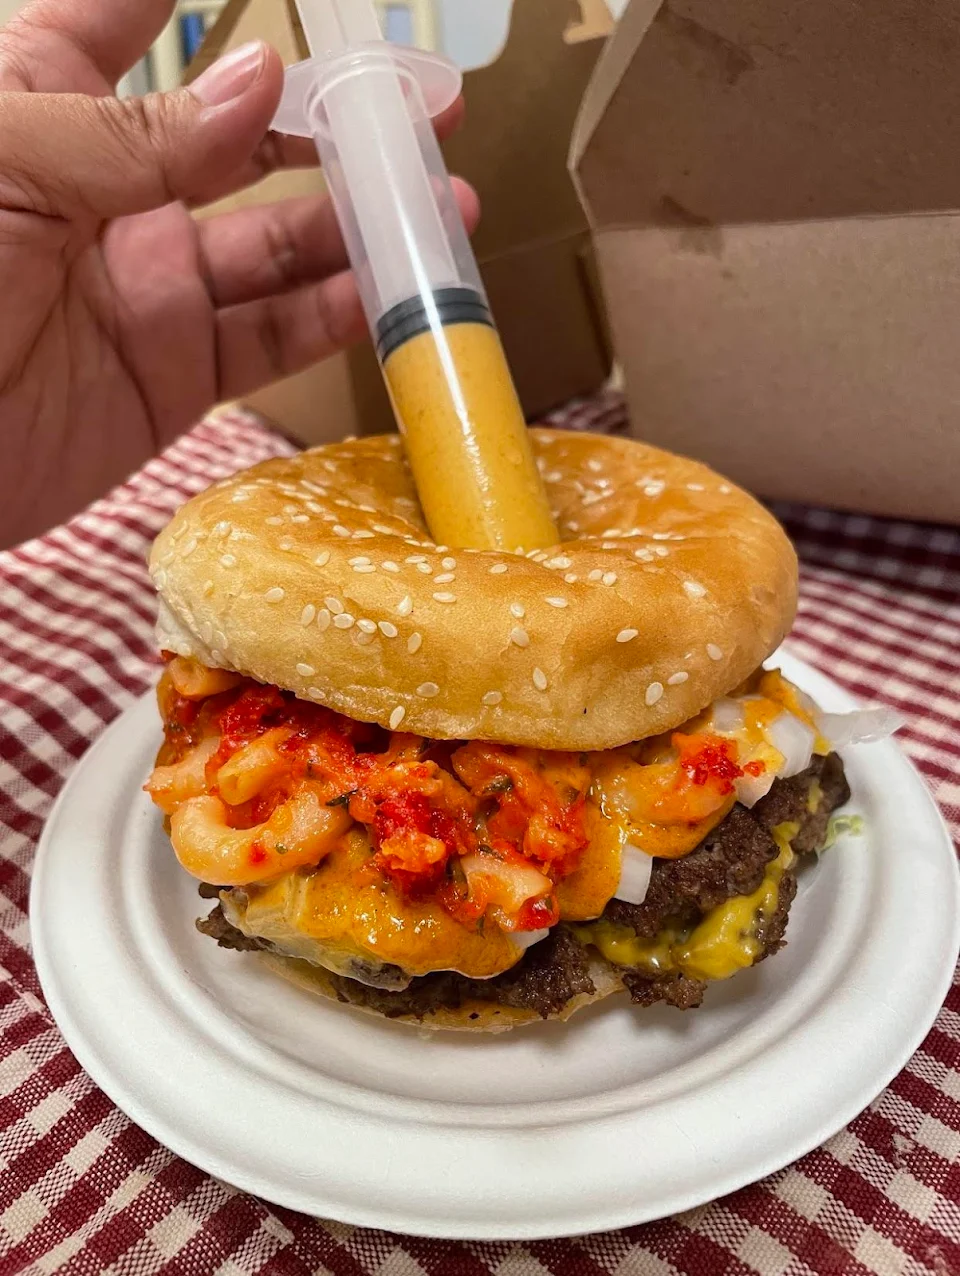 Tried a new food place and ordered their “Junkie” burger. It came with a special sauce syringe.